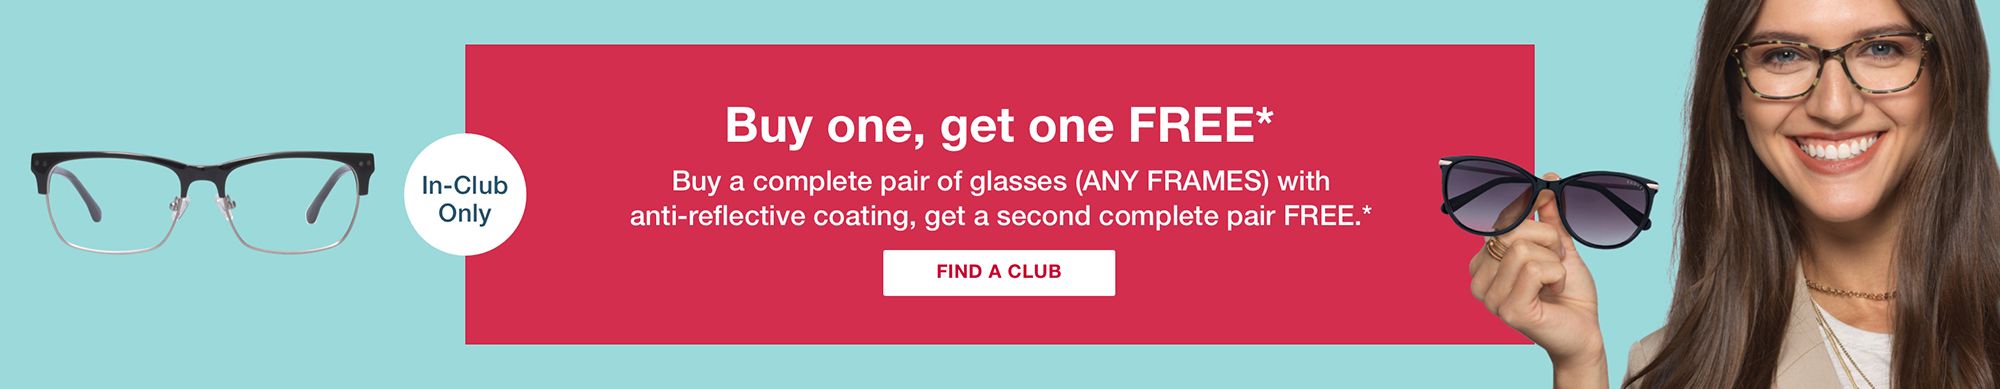 50% off your second set of frames.* see terms and conditions. Click to find a club